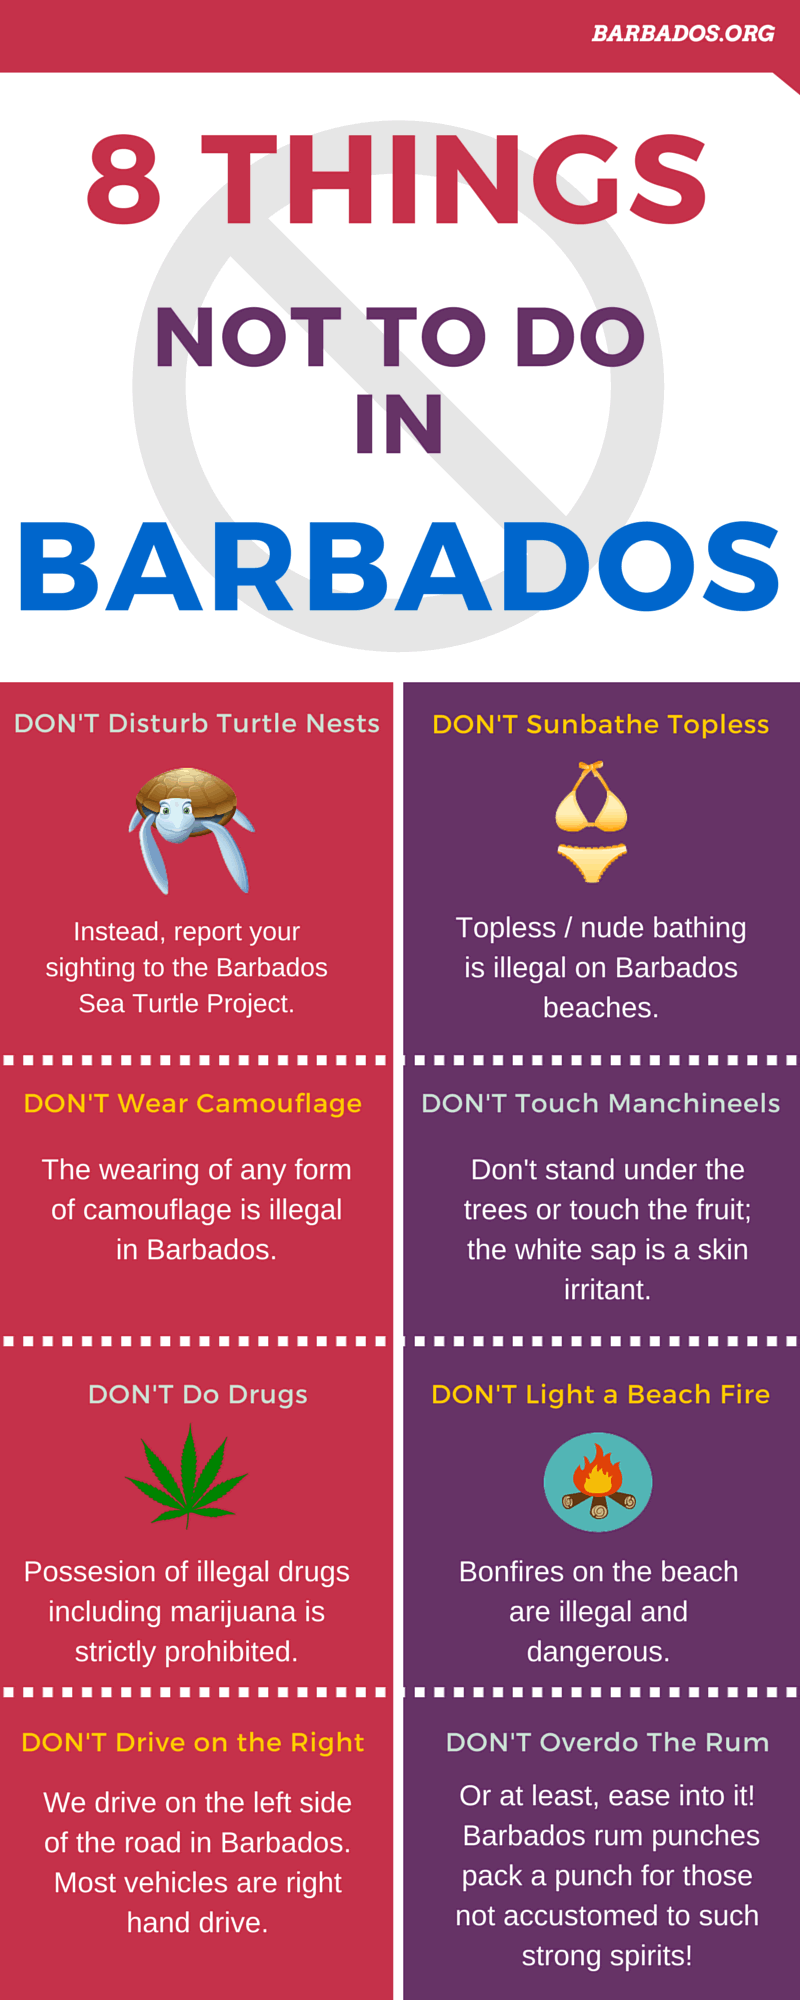 8 Things Not To Do In Barbados